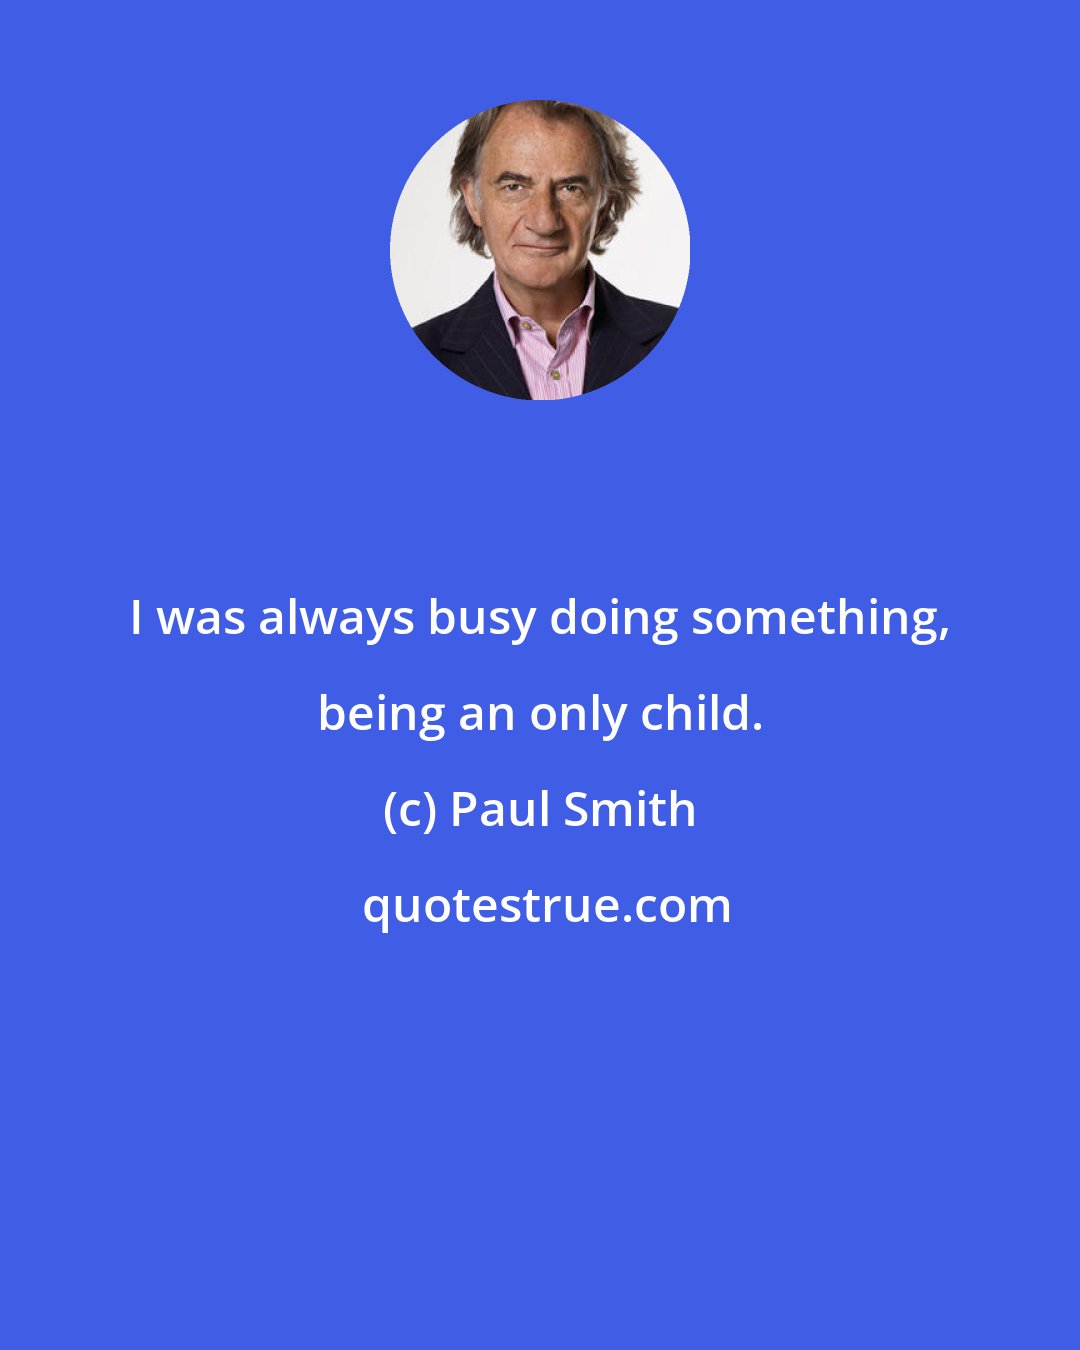 Paul Smith: I was always busy doing something, being an only child.